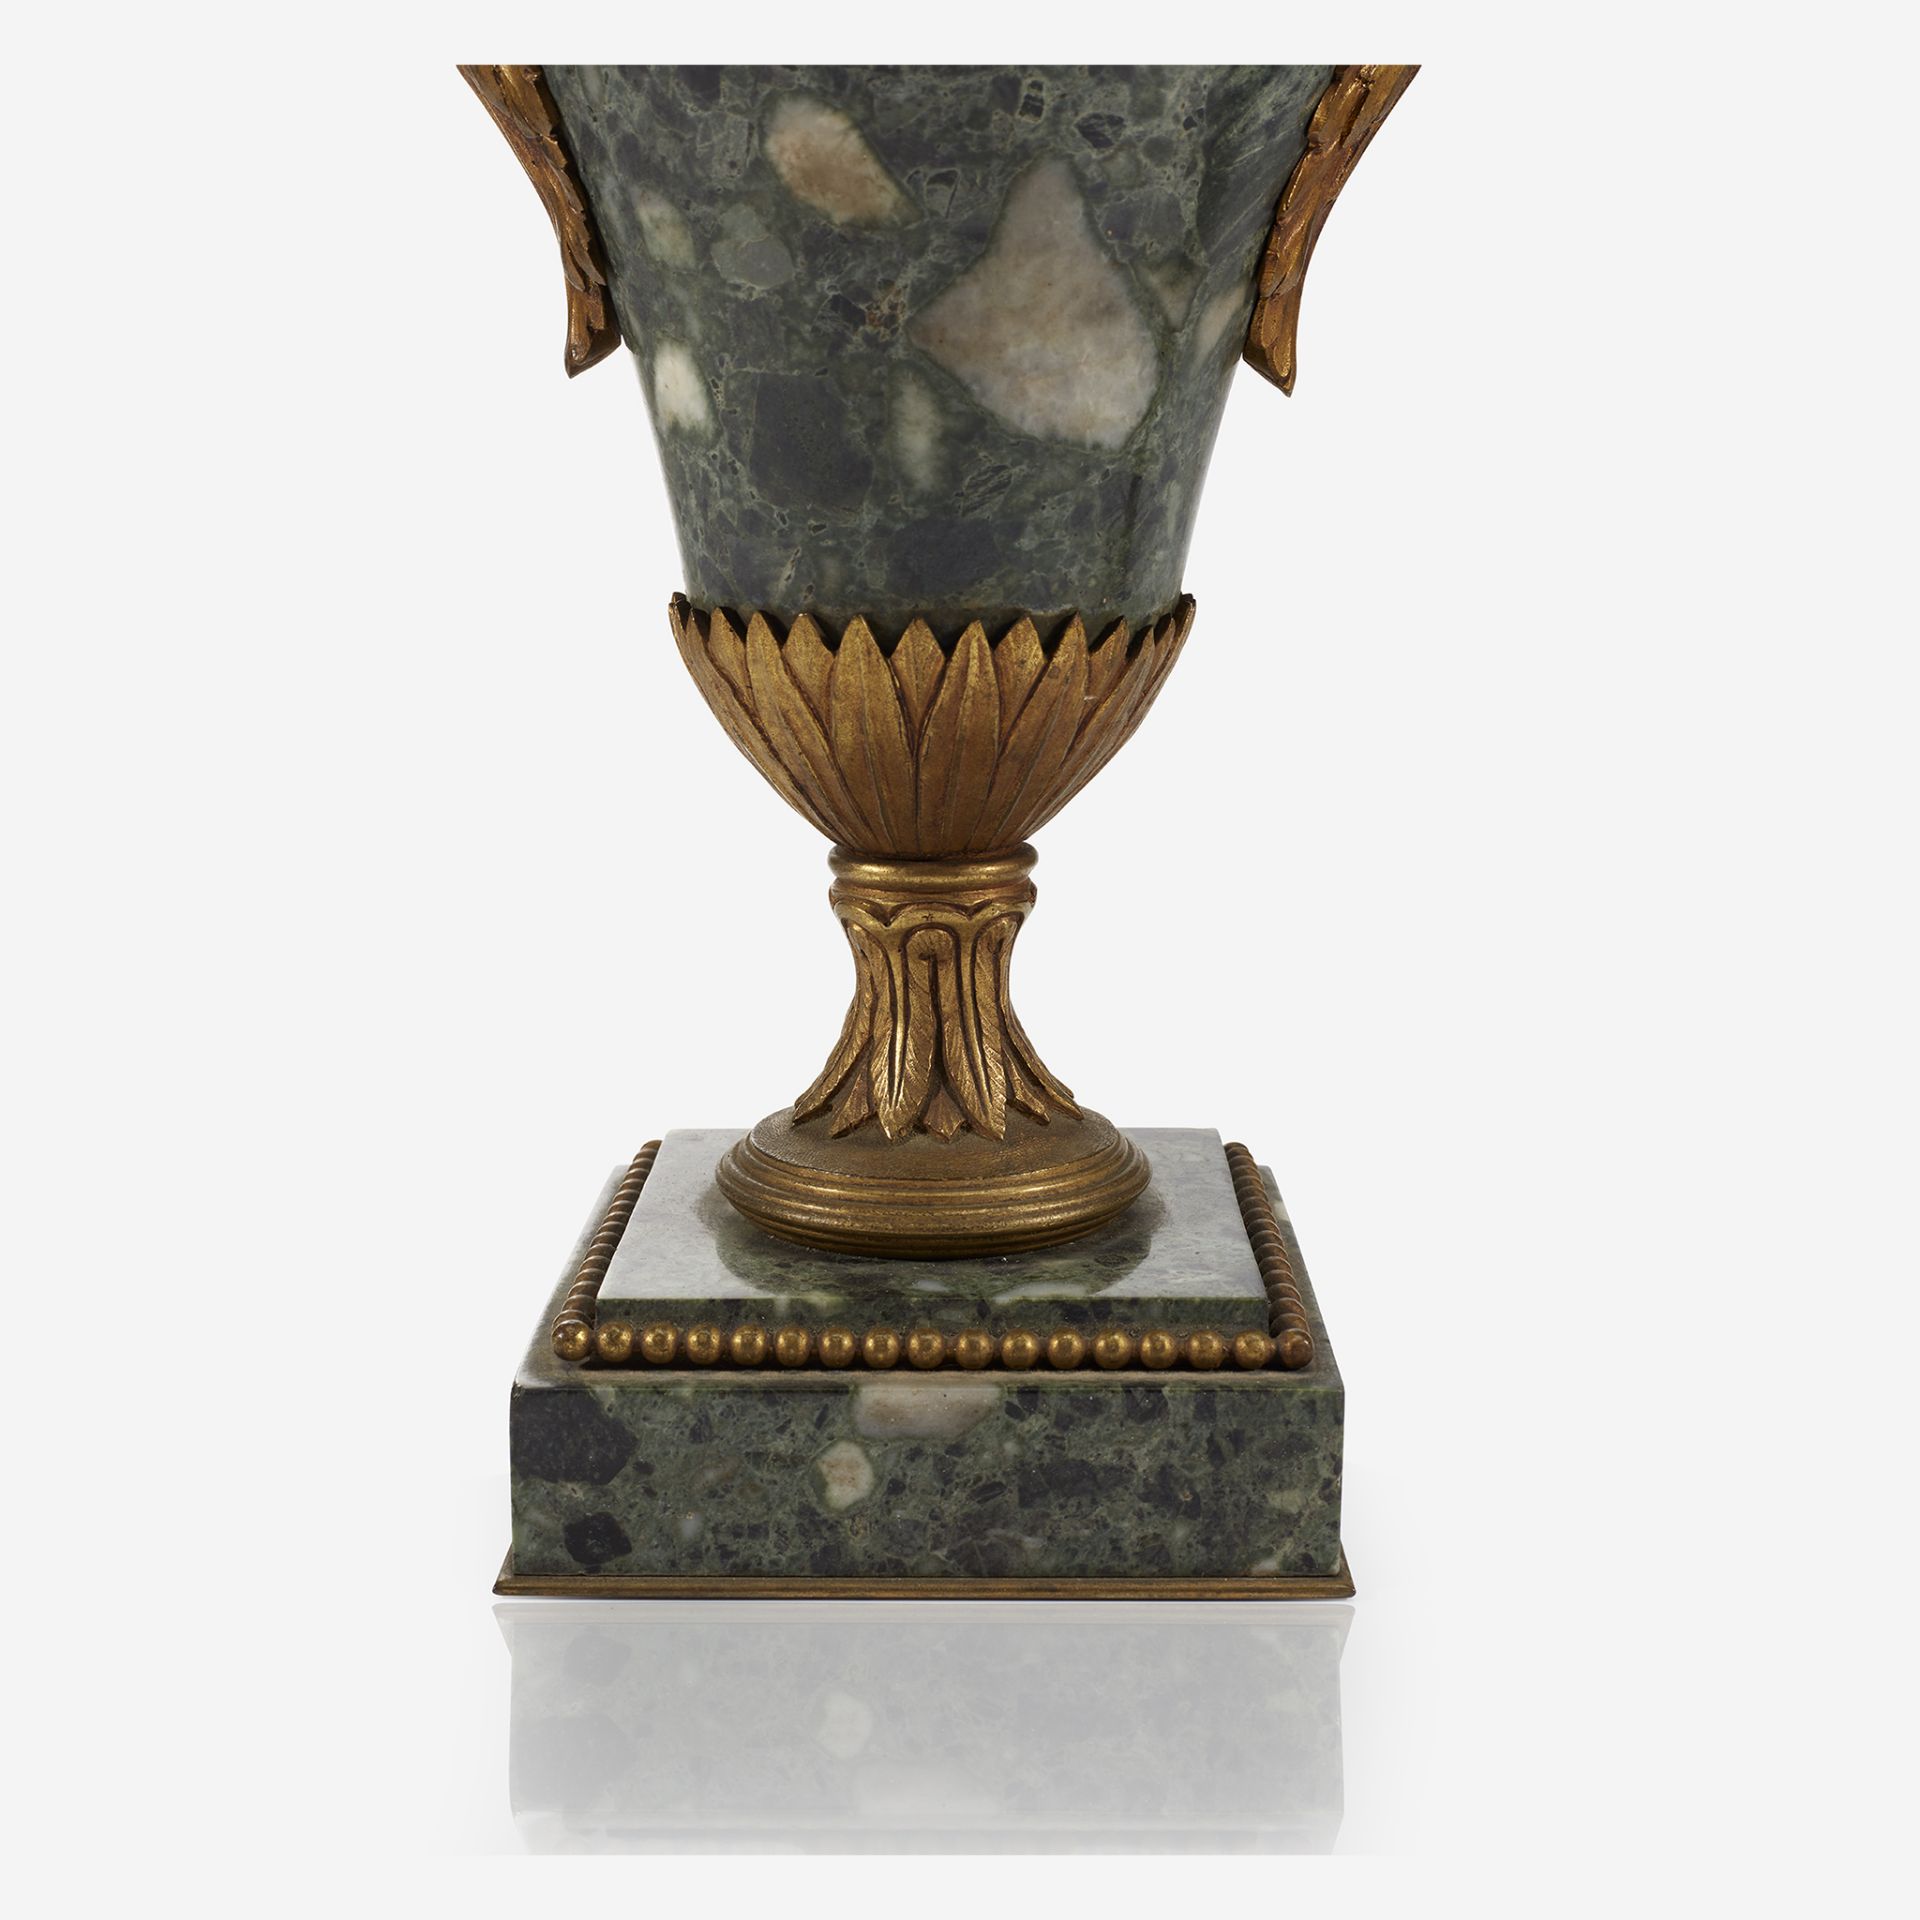 A pair of Louis XVI style gilt-bronze mounted specimen marble vases, Late 19th/early 20th century - Image 2 of 2